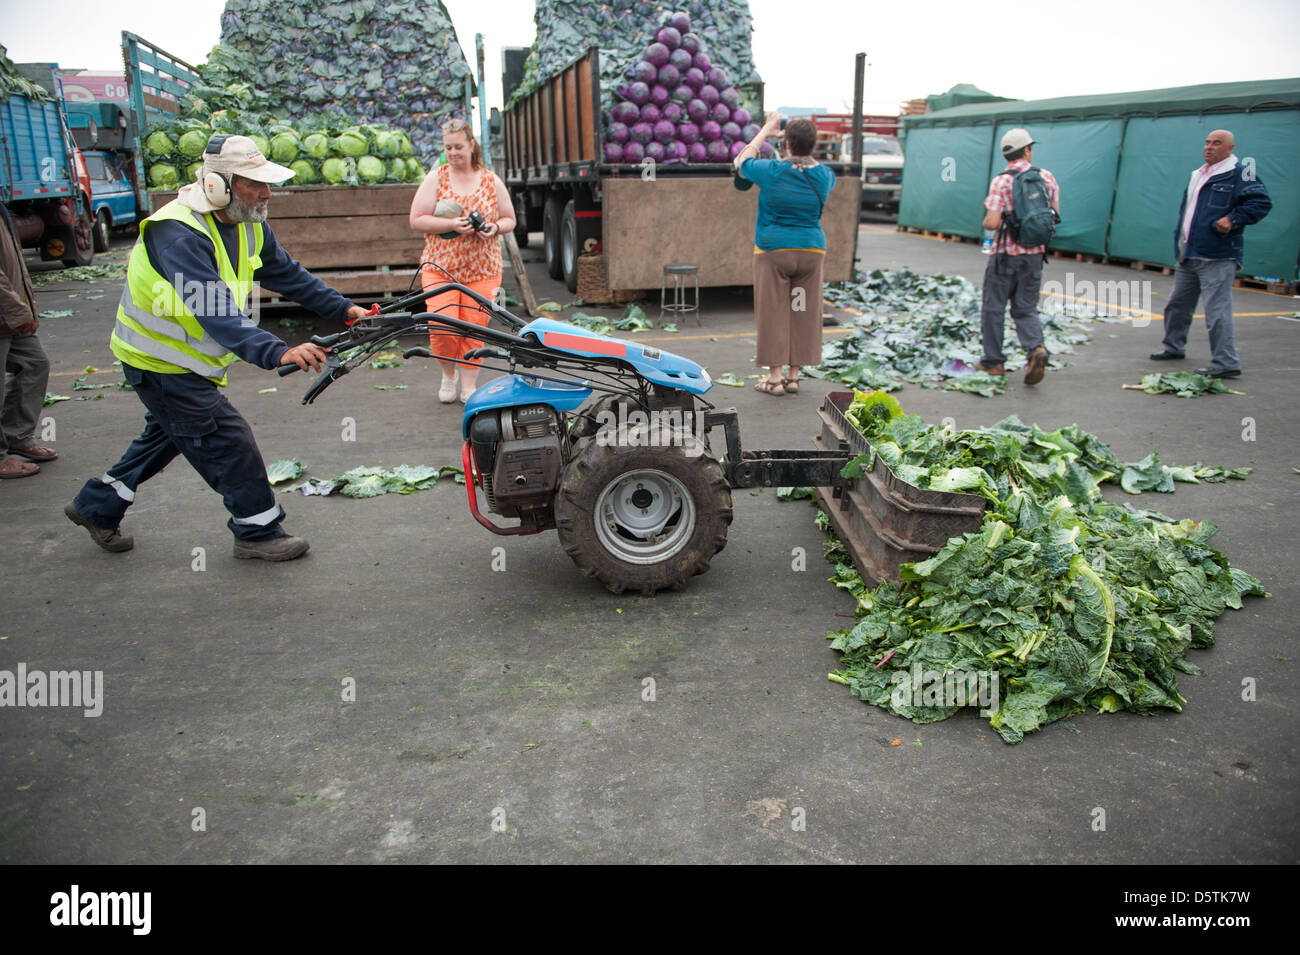 Worker clearing out vegetables on the streets of Lo Valledor central wholesale produce market in Santiago, Chile Stock Photo